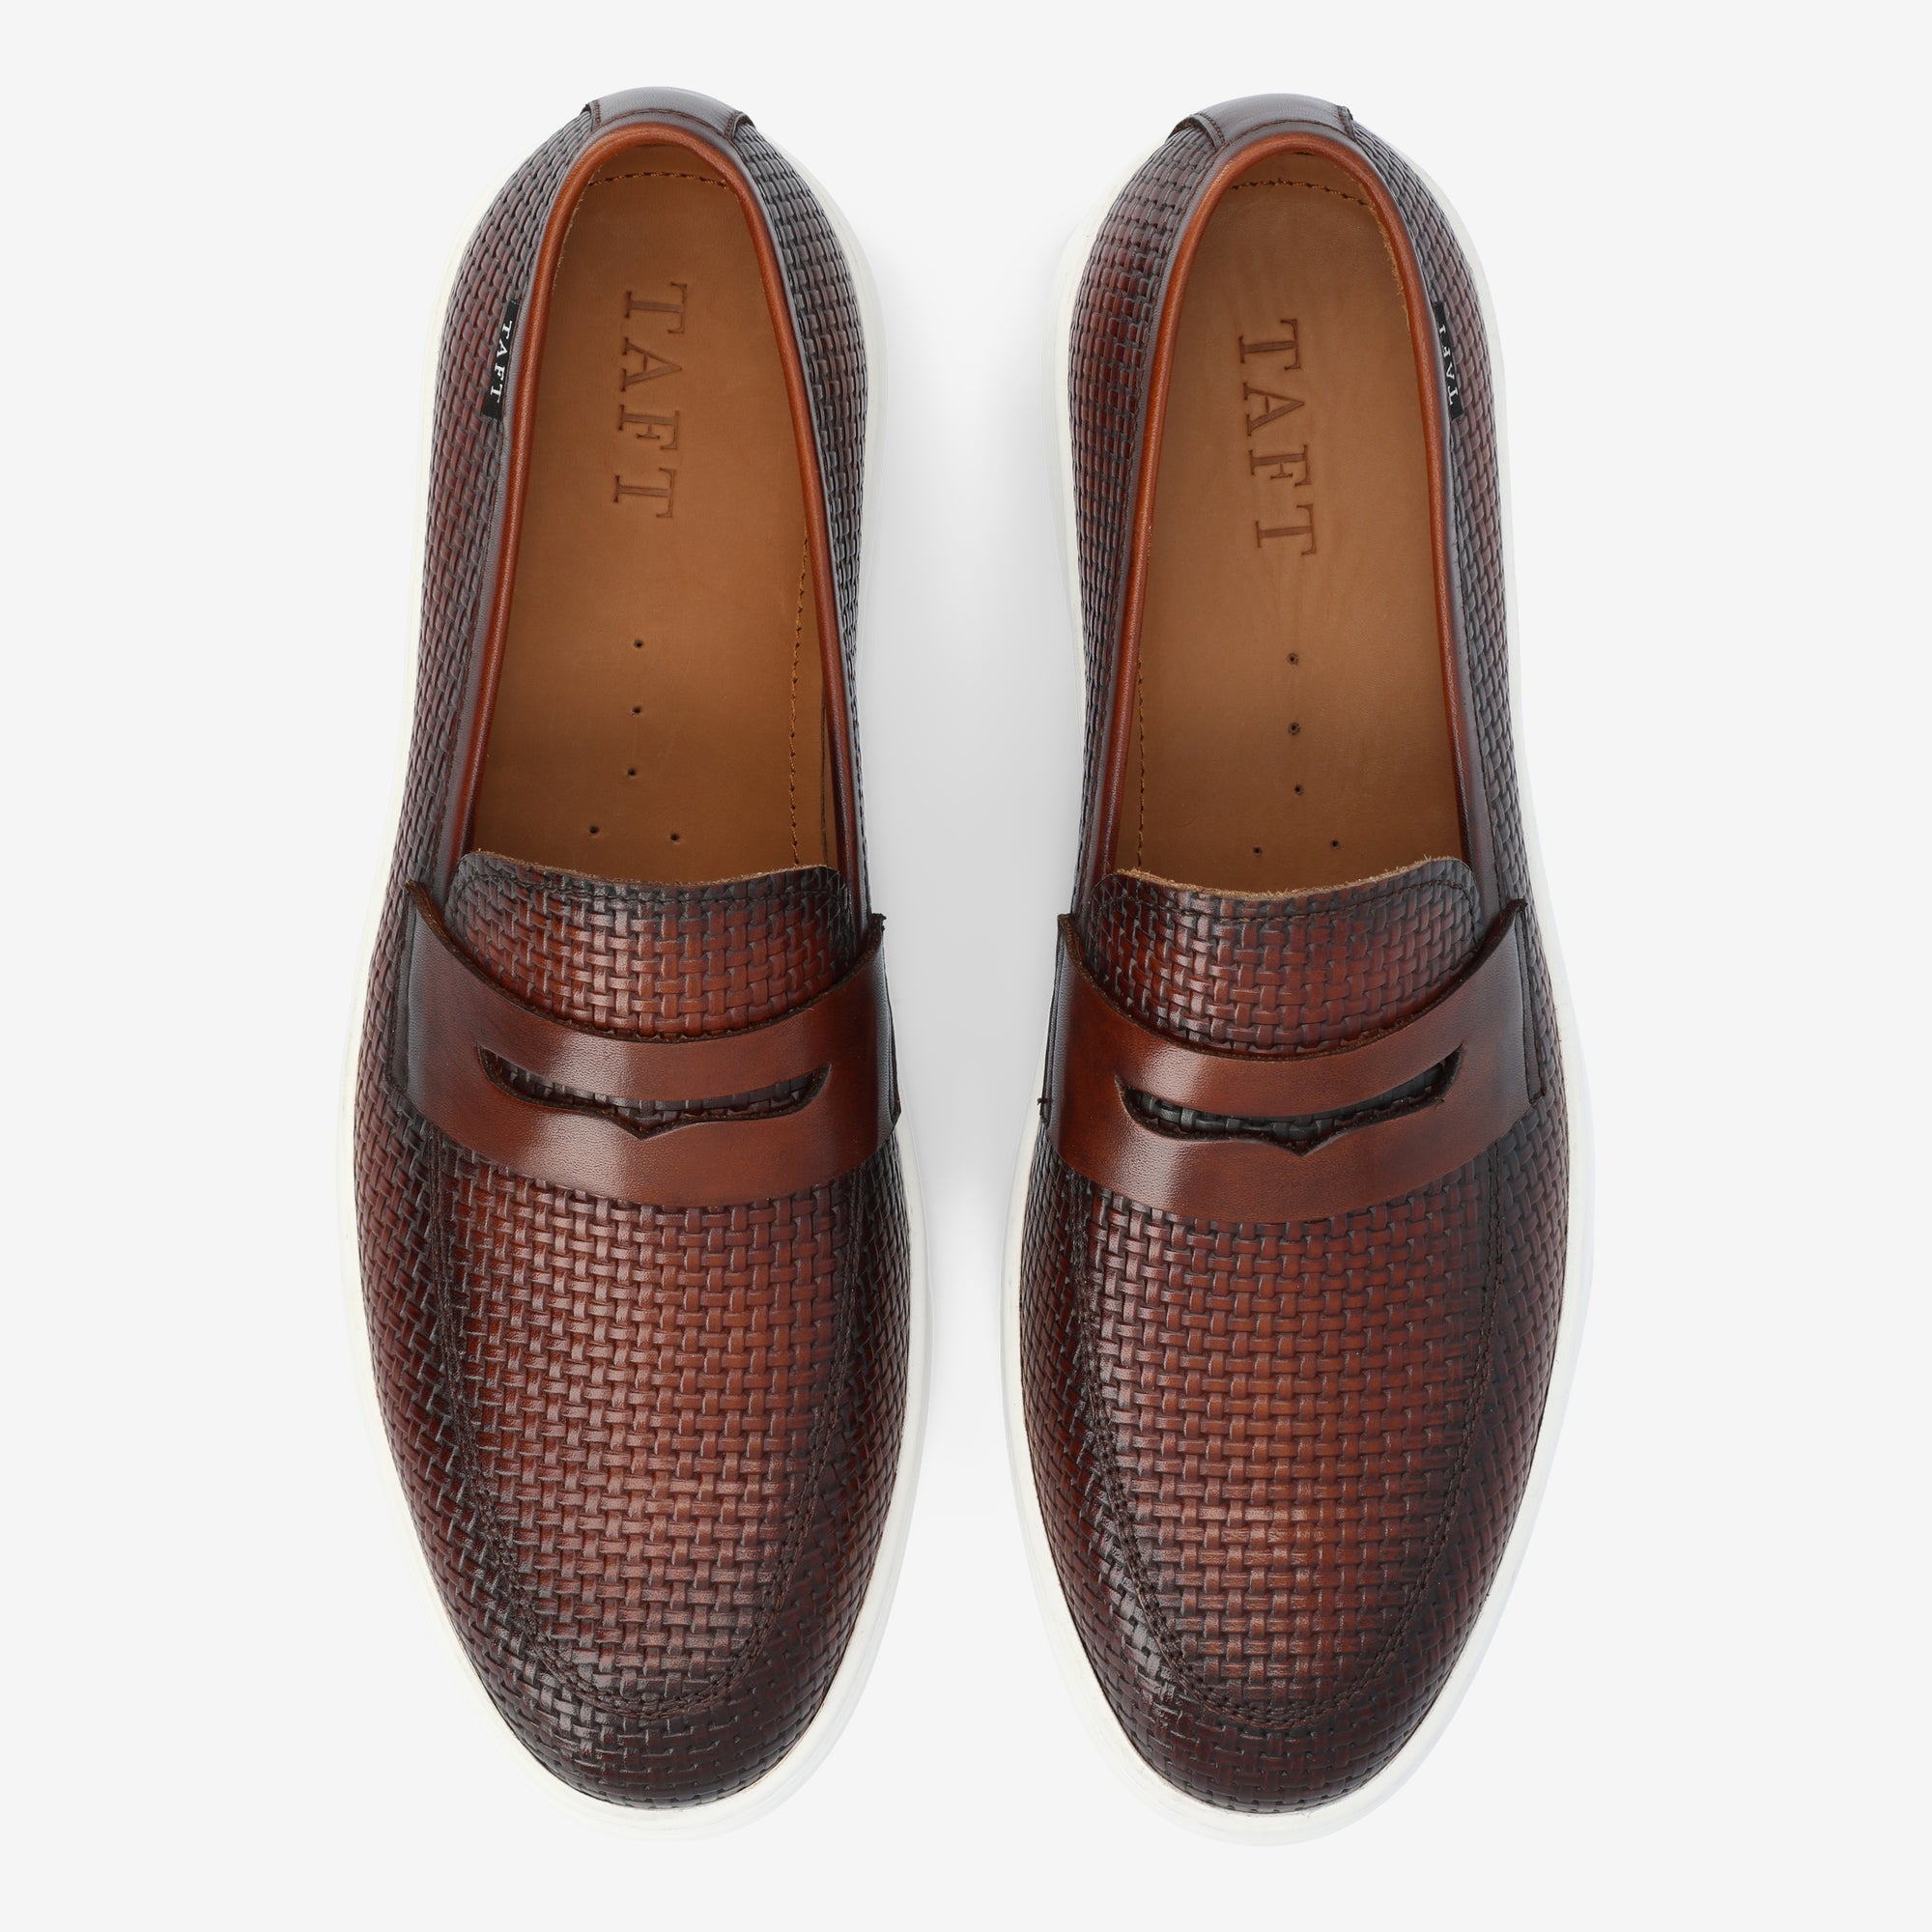 Model 106 Loafer In Chili (Last Chance, Final Sale)